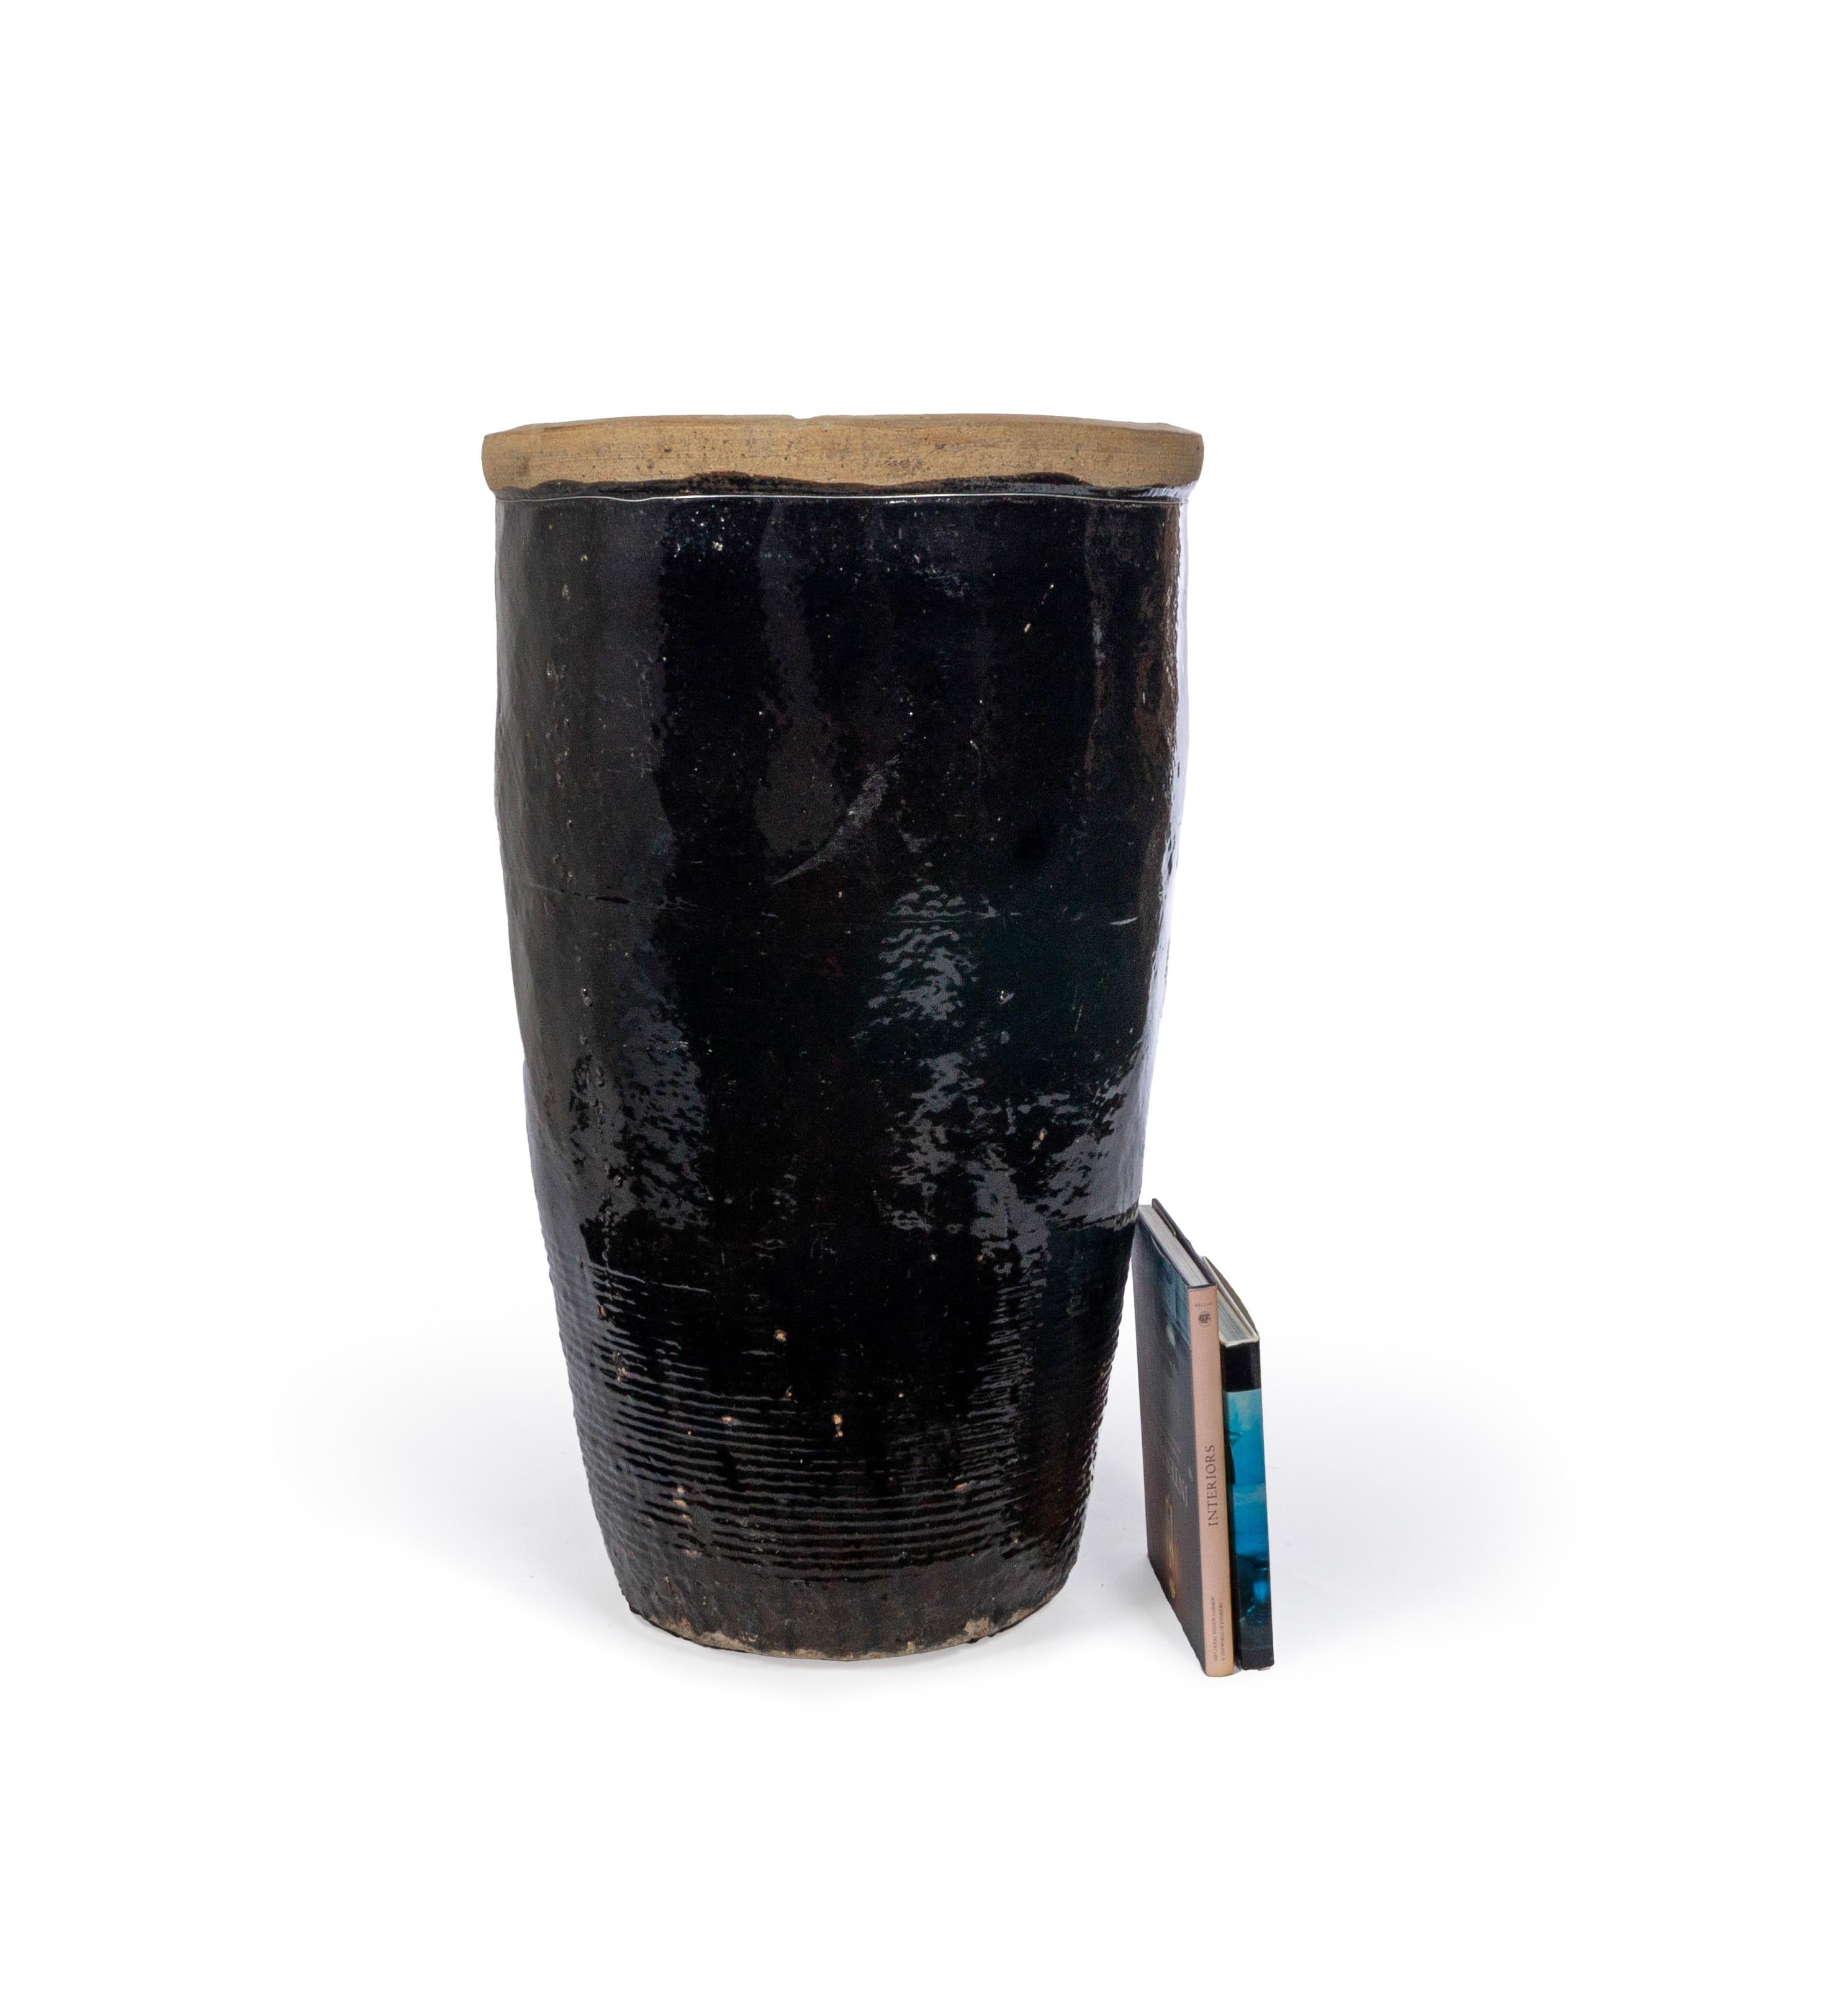 This storage jar features a beautiful sand-colored, textured lip and a glossy dark chocolate, black colored glaze throughout its length.

This piece is a part of one-of-a-kind collection, Le Monde. French for “The World”, the Le Monde collection